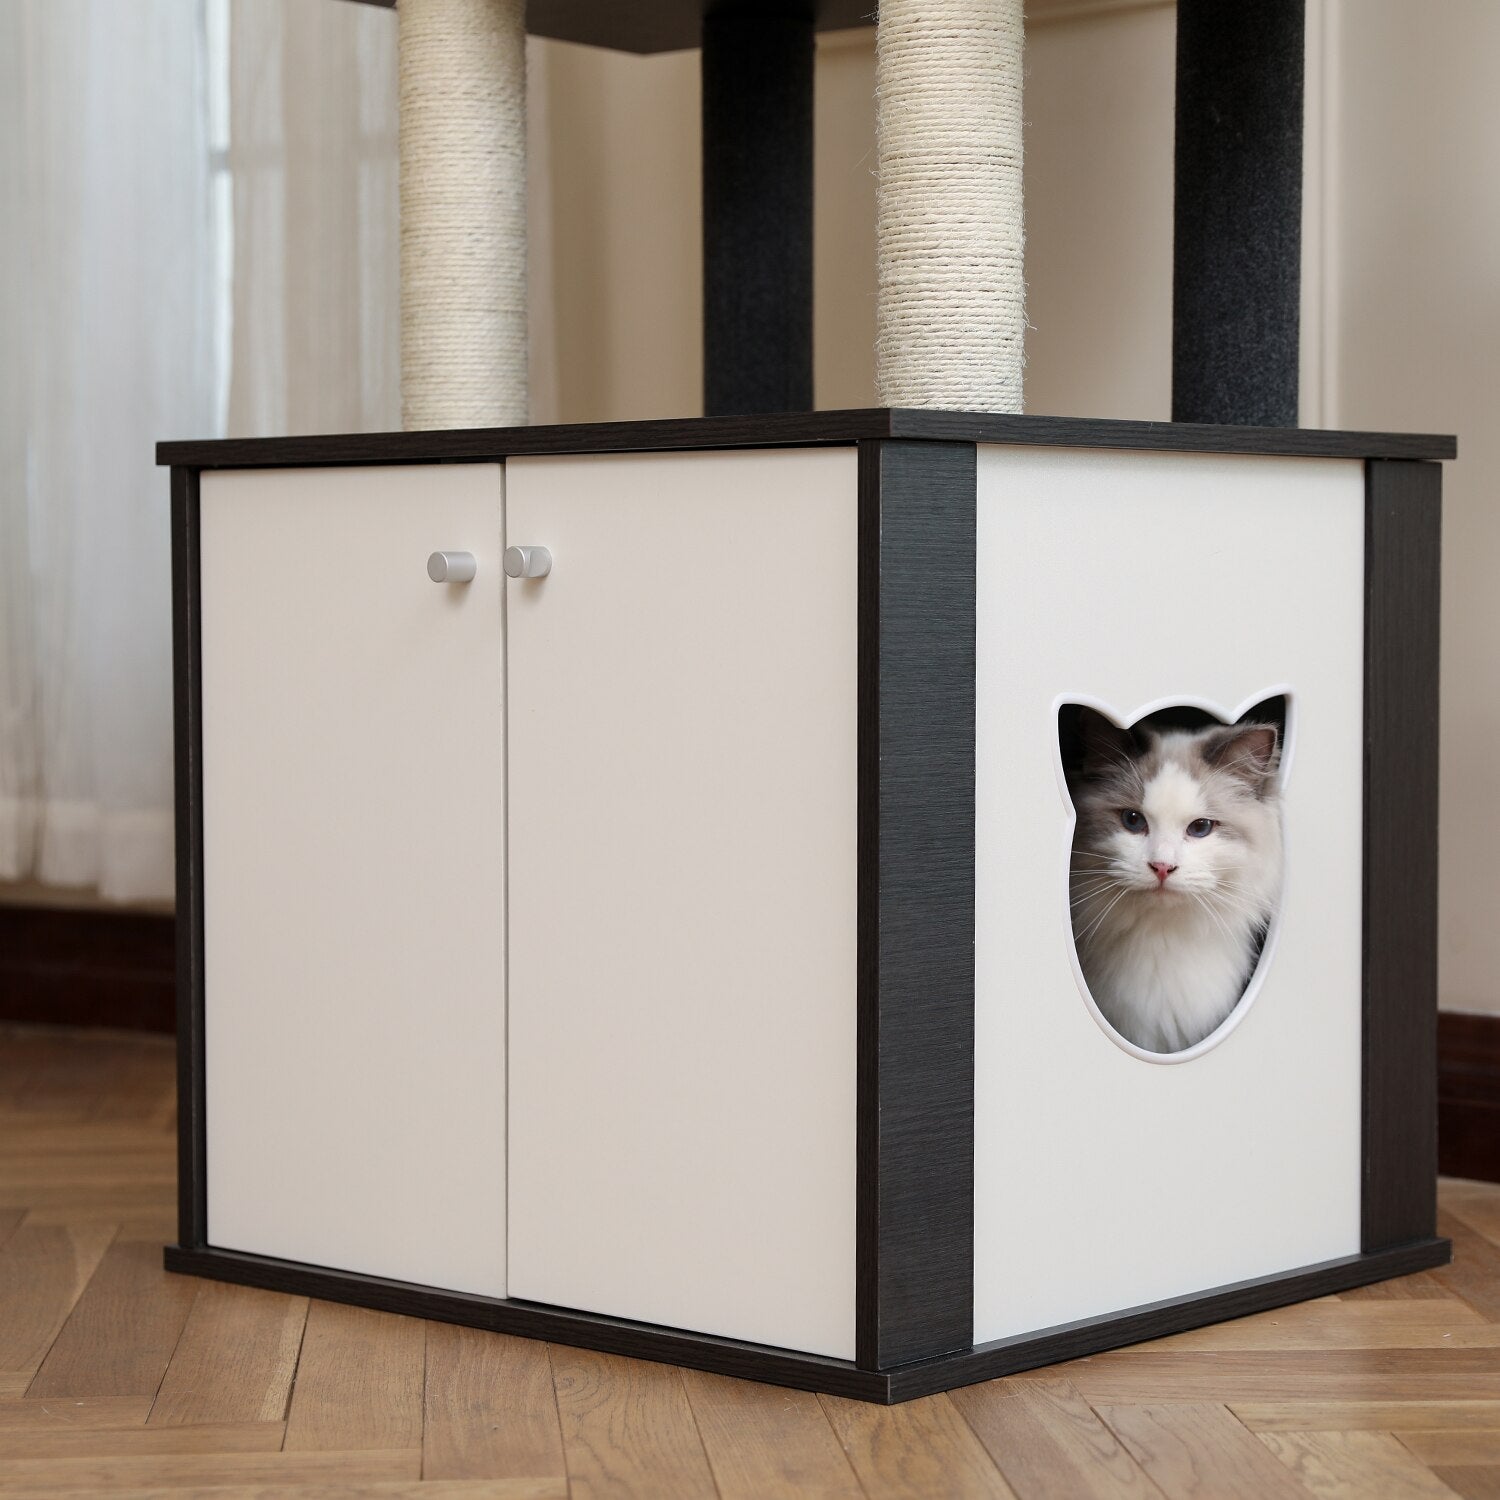 Wooden Cat Tree with Washroom